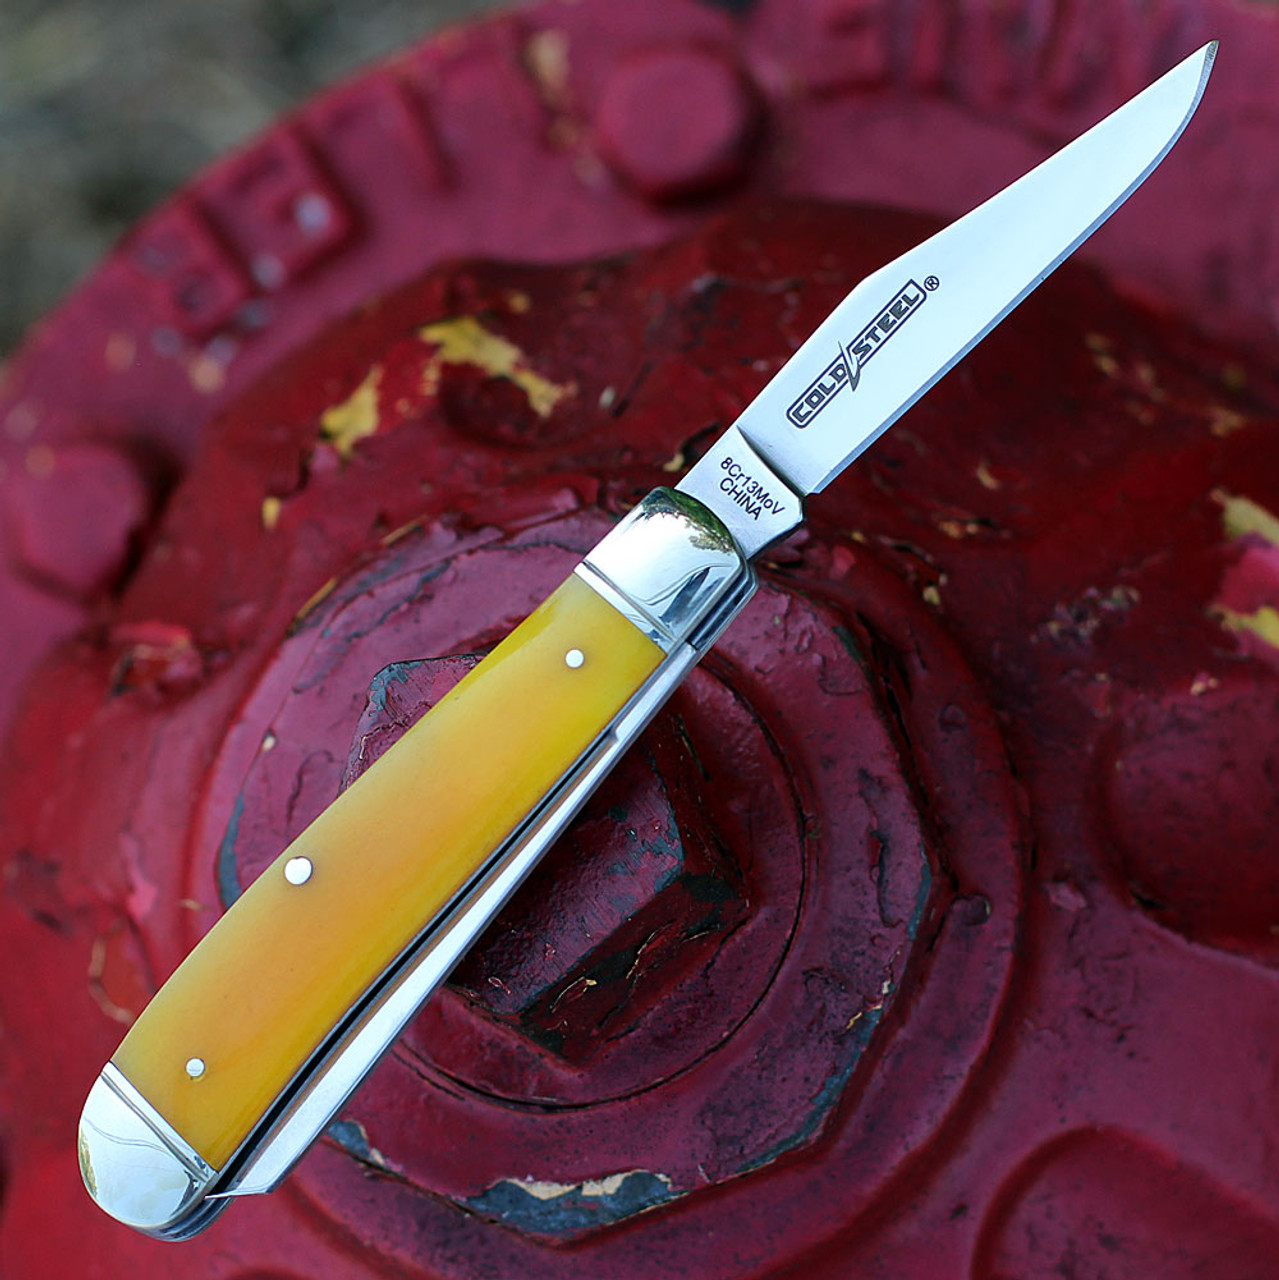 Cold Steel Mini Trapper (CS-FL-MTRPR-B) - 8Cr13MoV Stainless Steel Satin Clip and Spey Blades, Yellow Bone Handle